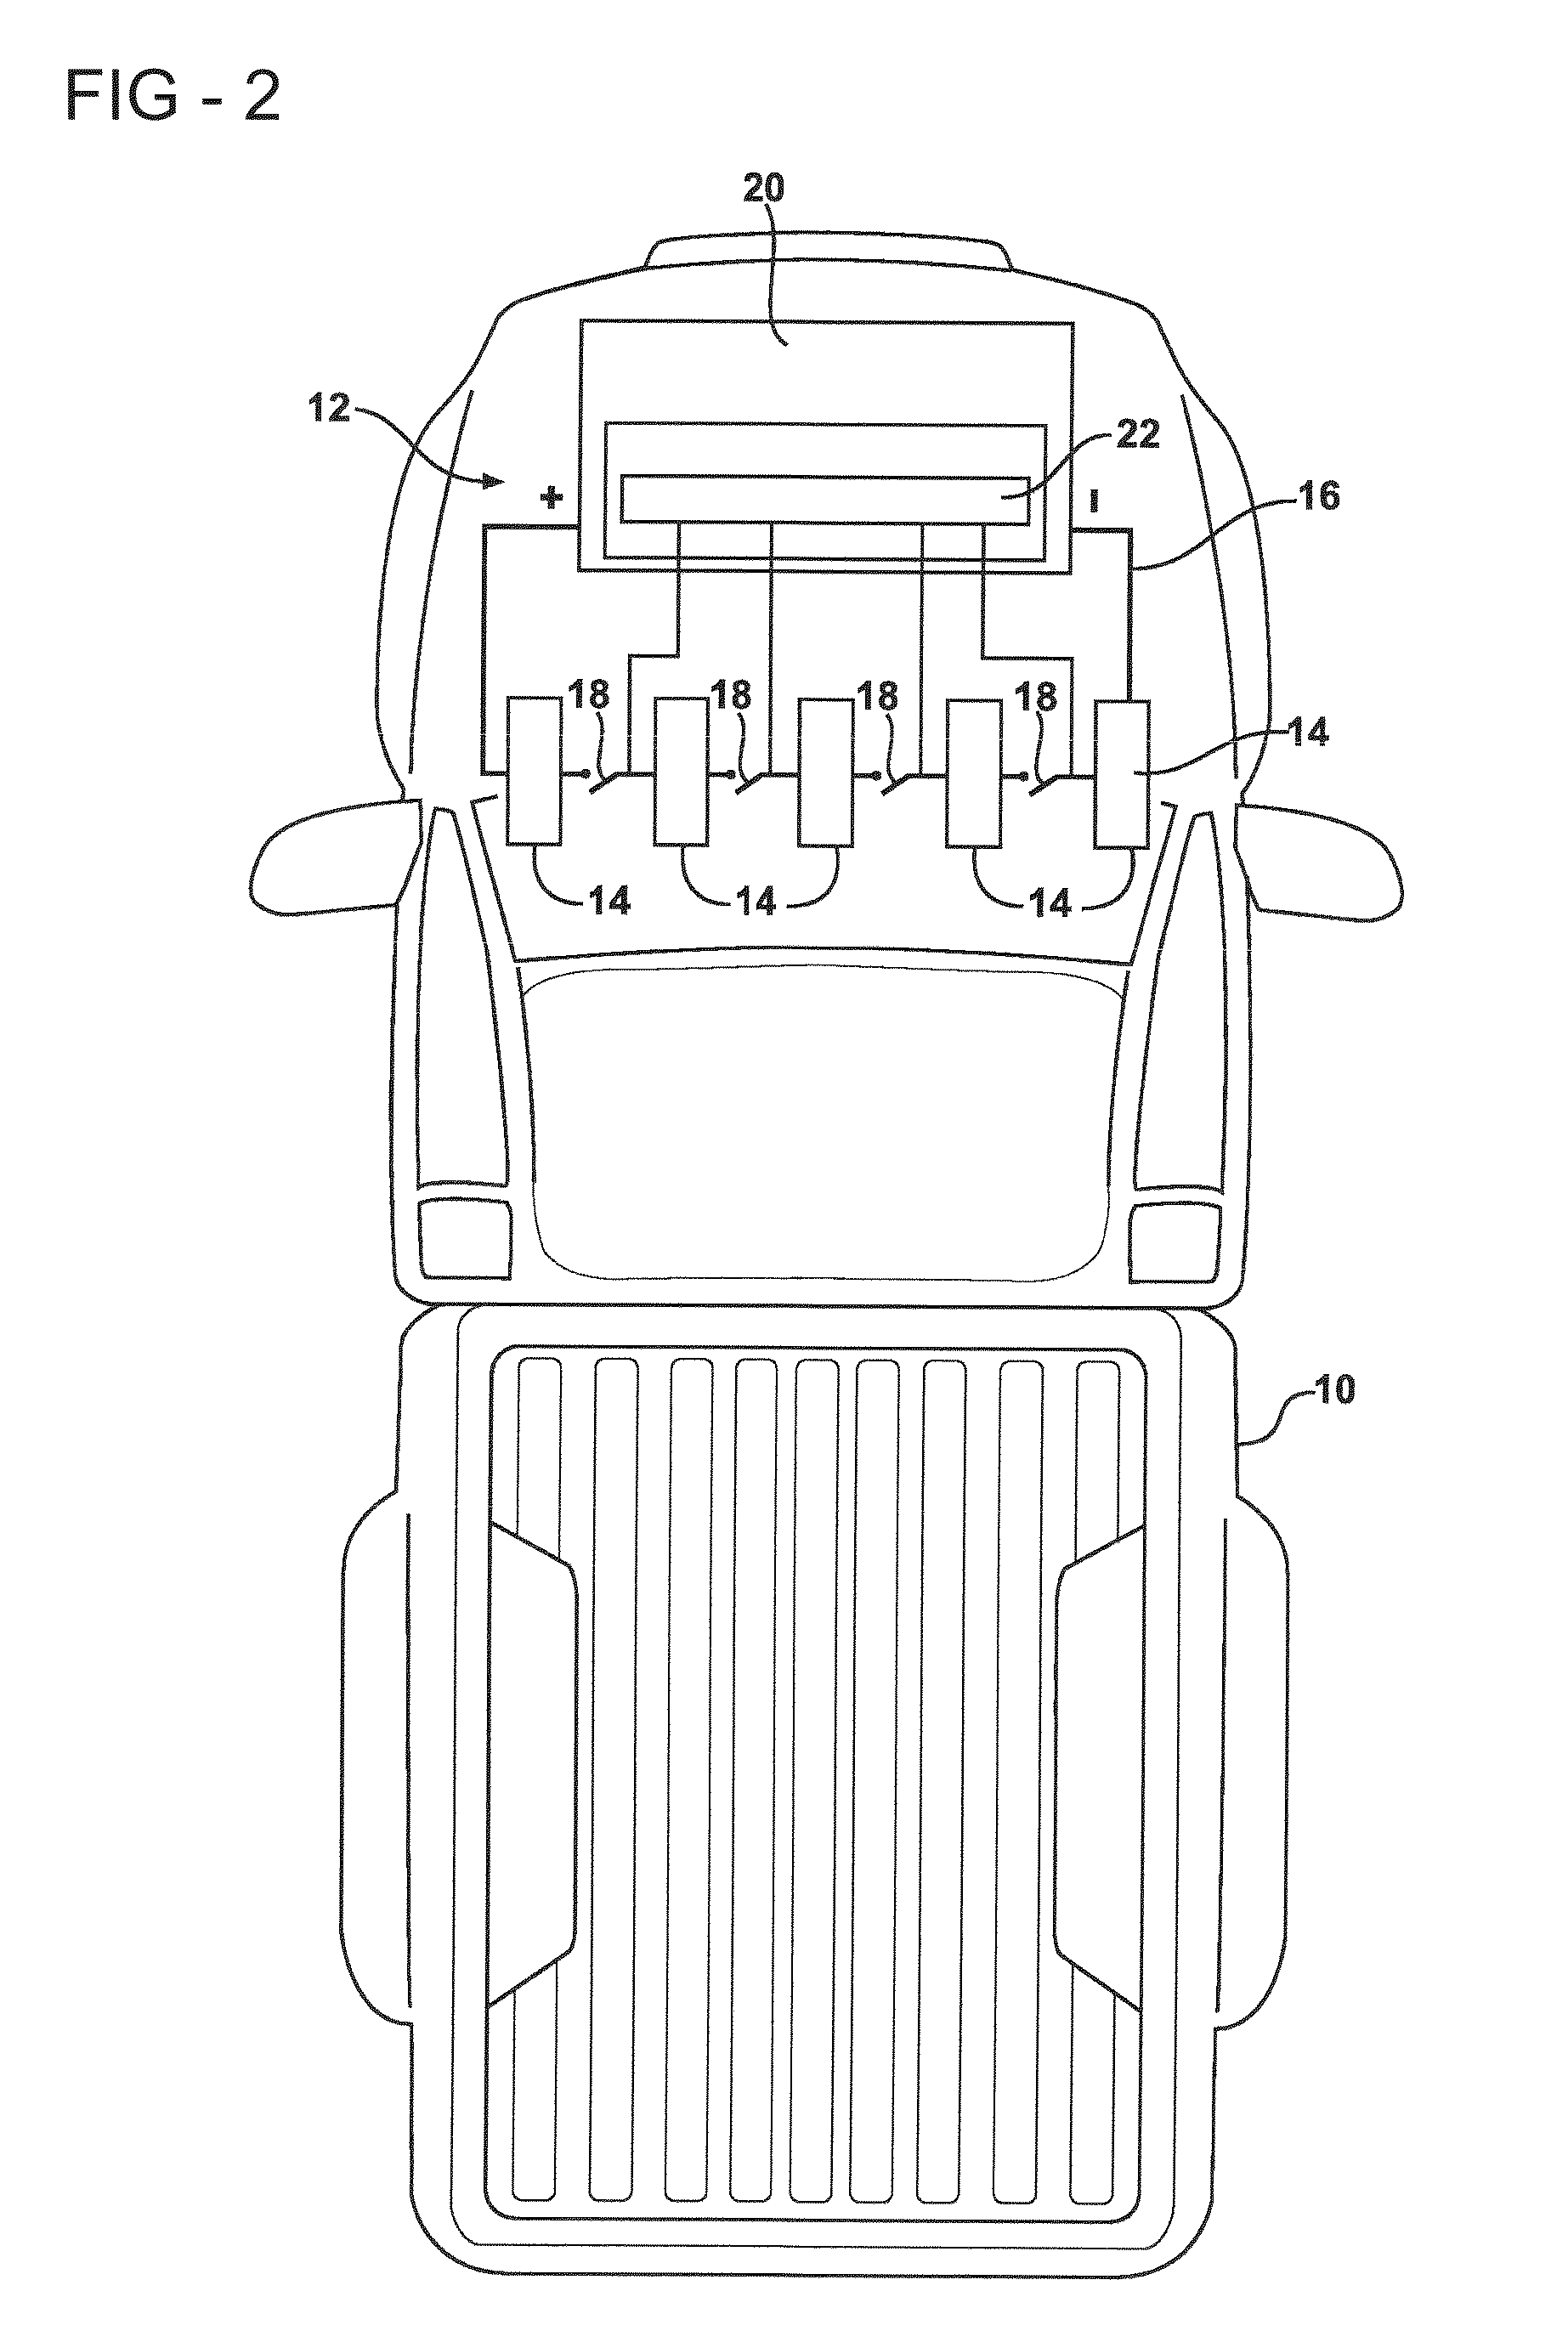 Lithium titanate cell with reduced gassing